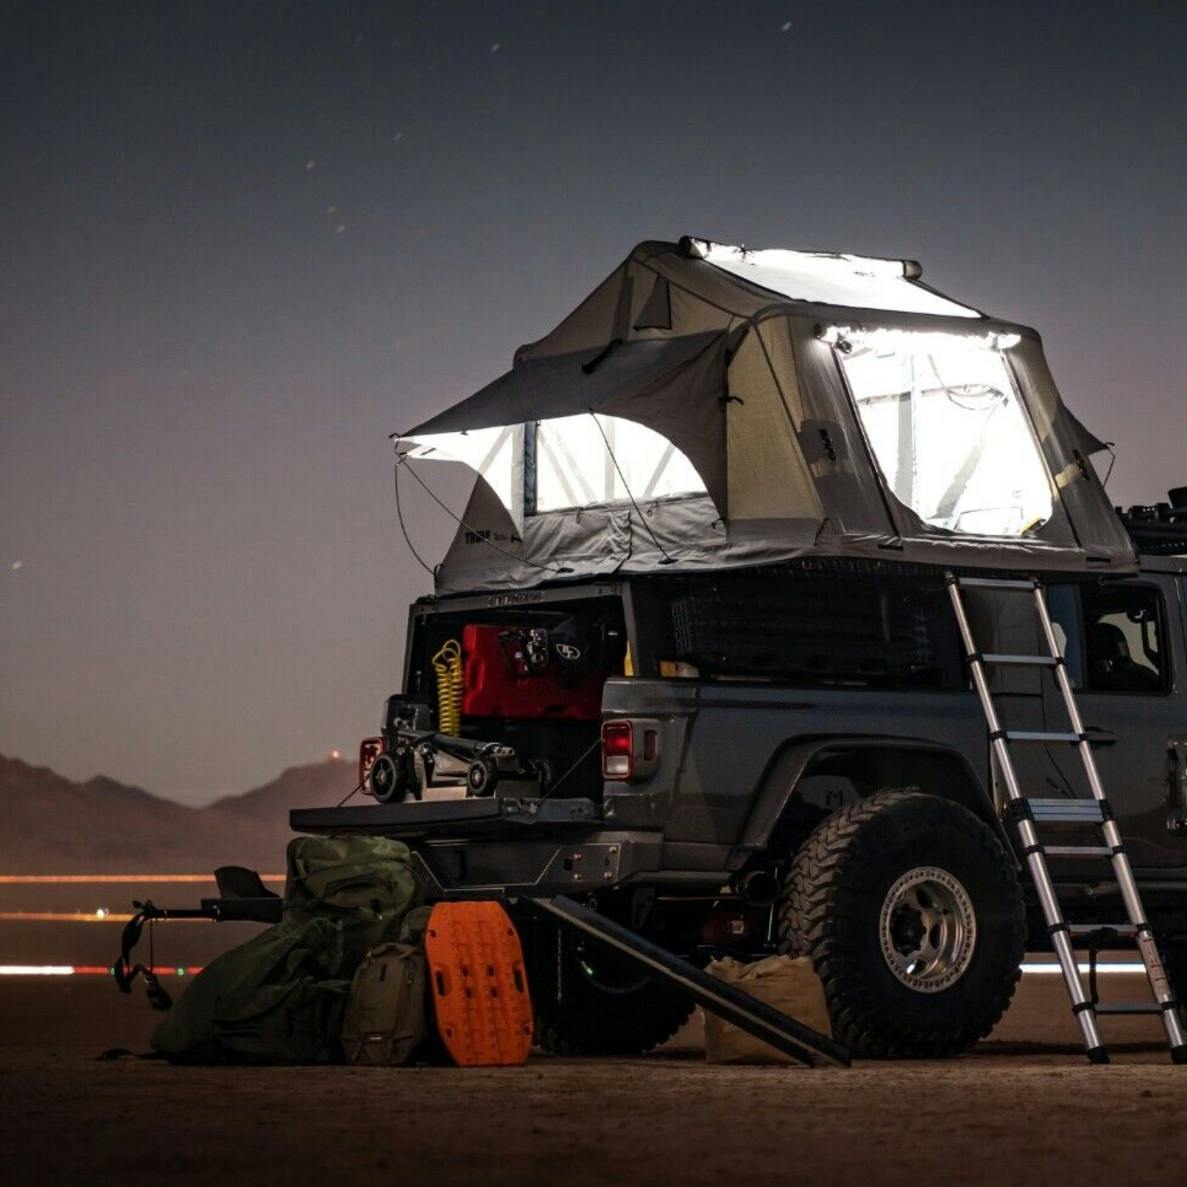 VersaHaul Sport Carrier with Ramp on Jeep camping